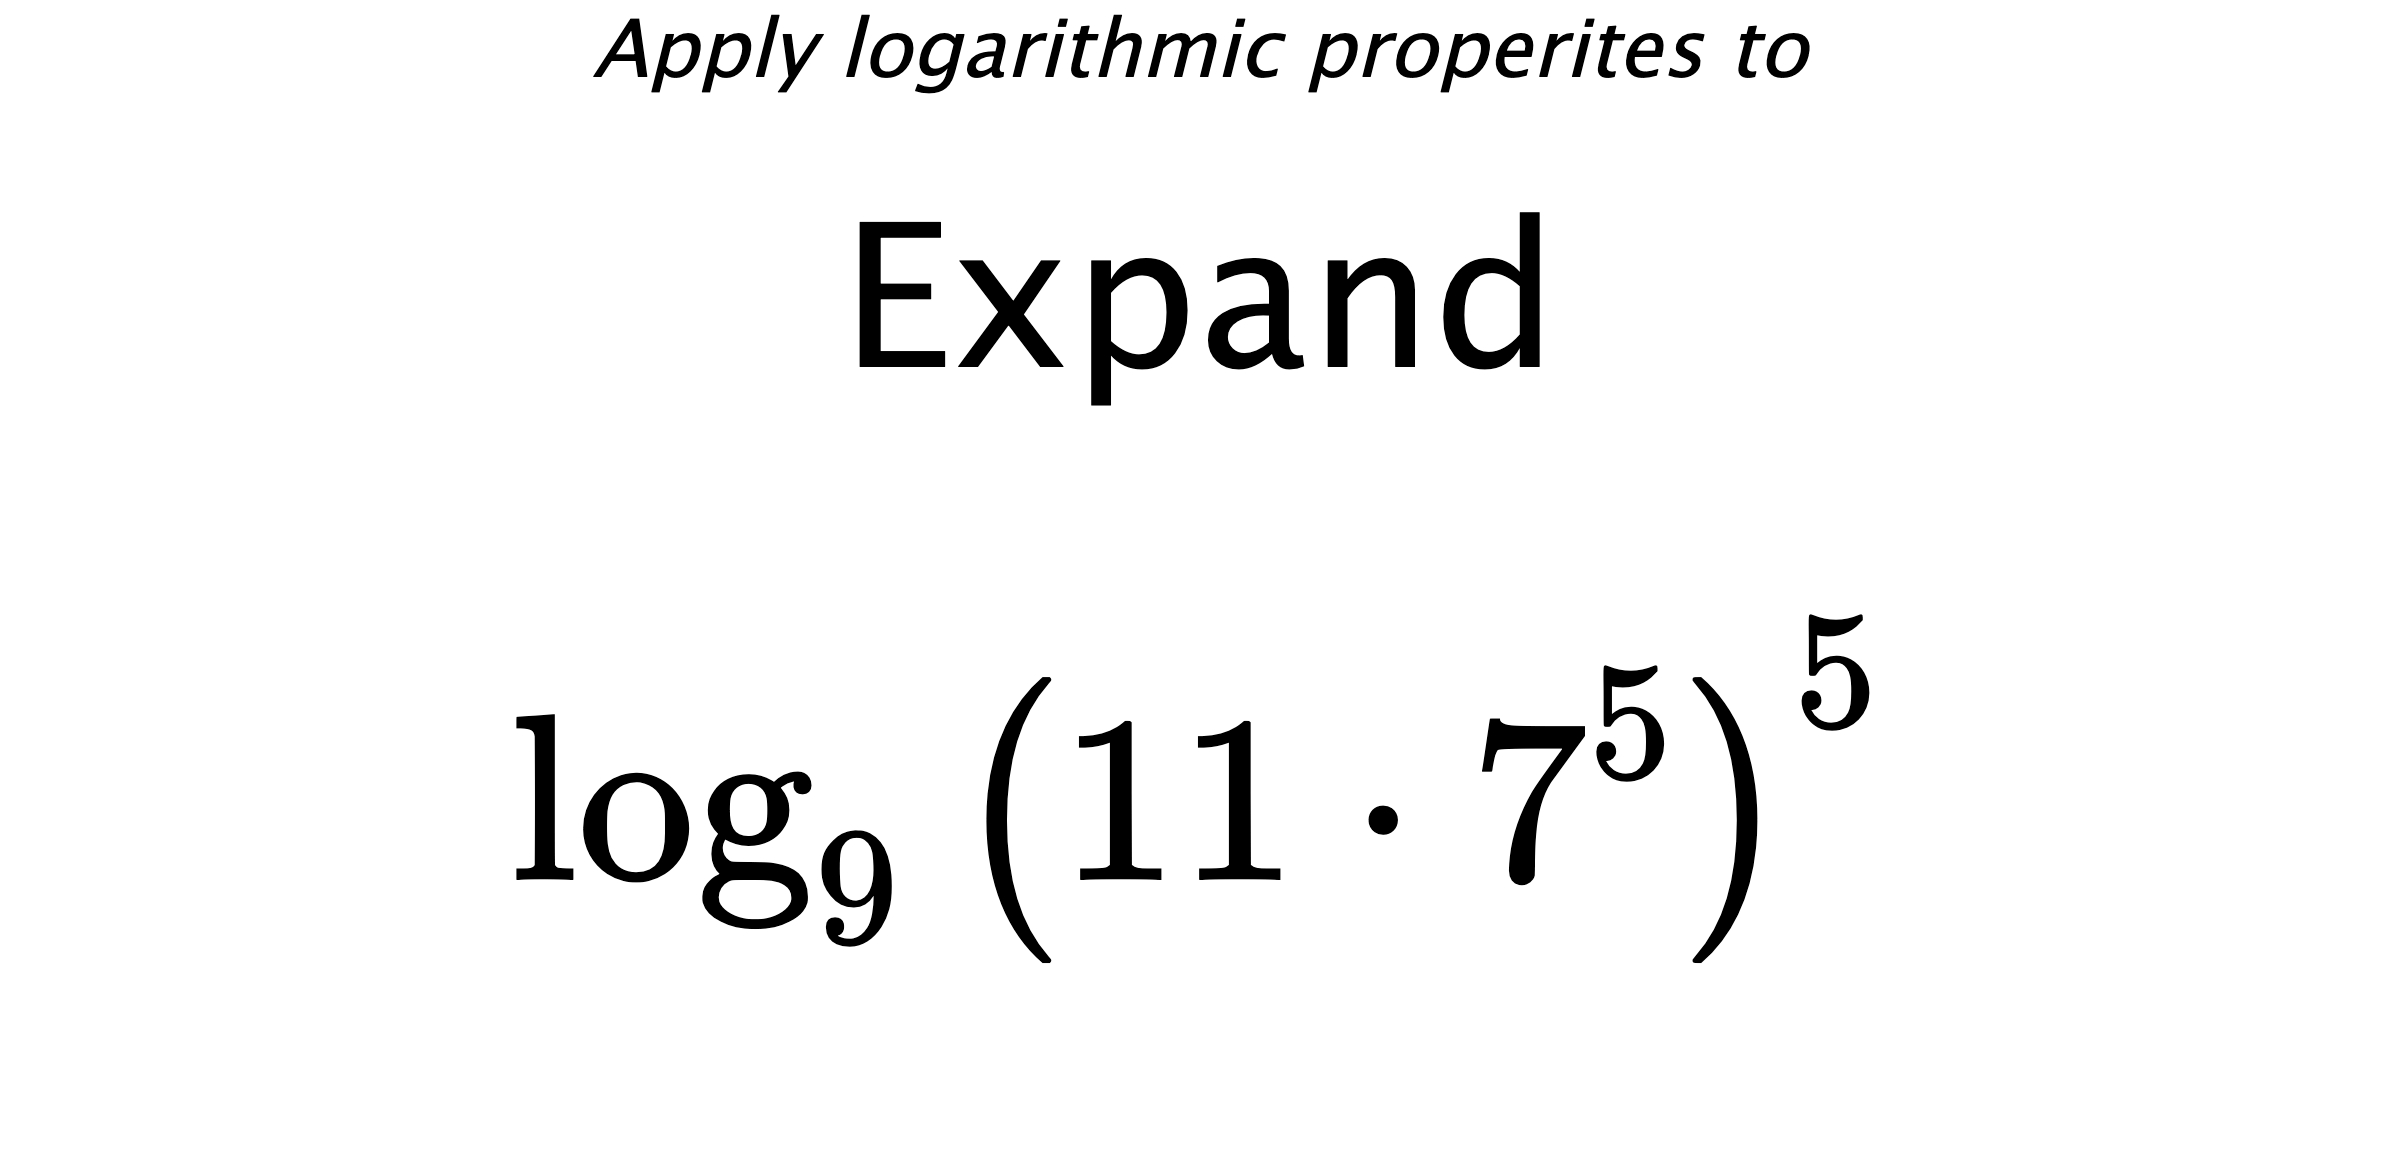 Apply logarithmic properites to Expand $$ \log_{9} \left( 11 \cdot 7^{5} \right)^{5} $$